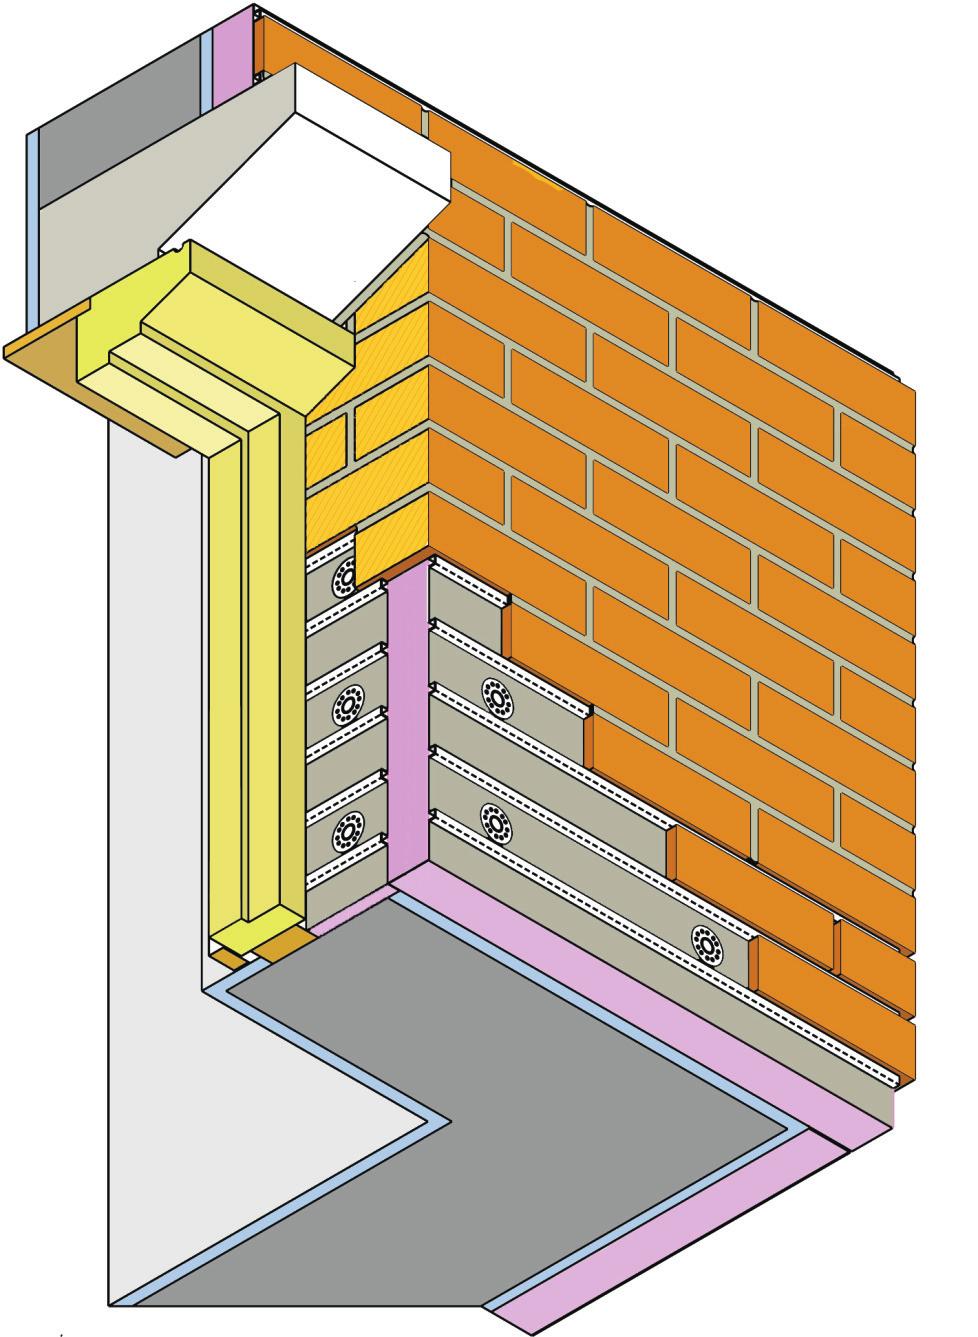 Figure 2 Typical X-Clad External Cladding System 1 2 3 4 1 2 3 4 5 6 7 insulated backerboard panel backerboard panel fastener(1 ) clay brick slip pointing mortar 40 mm x 25 mm timber battens